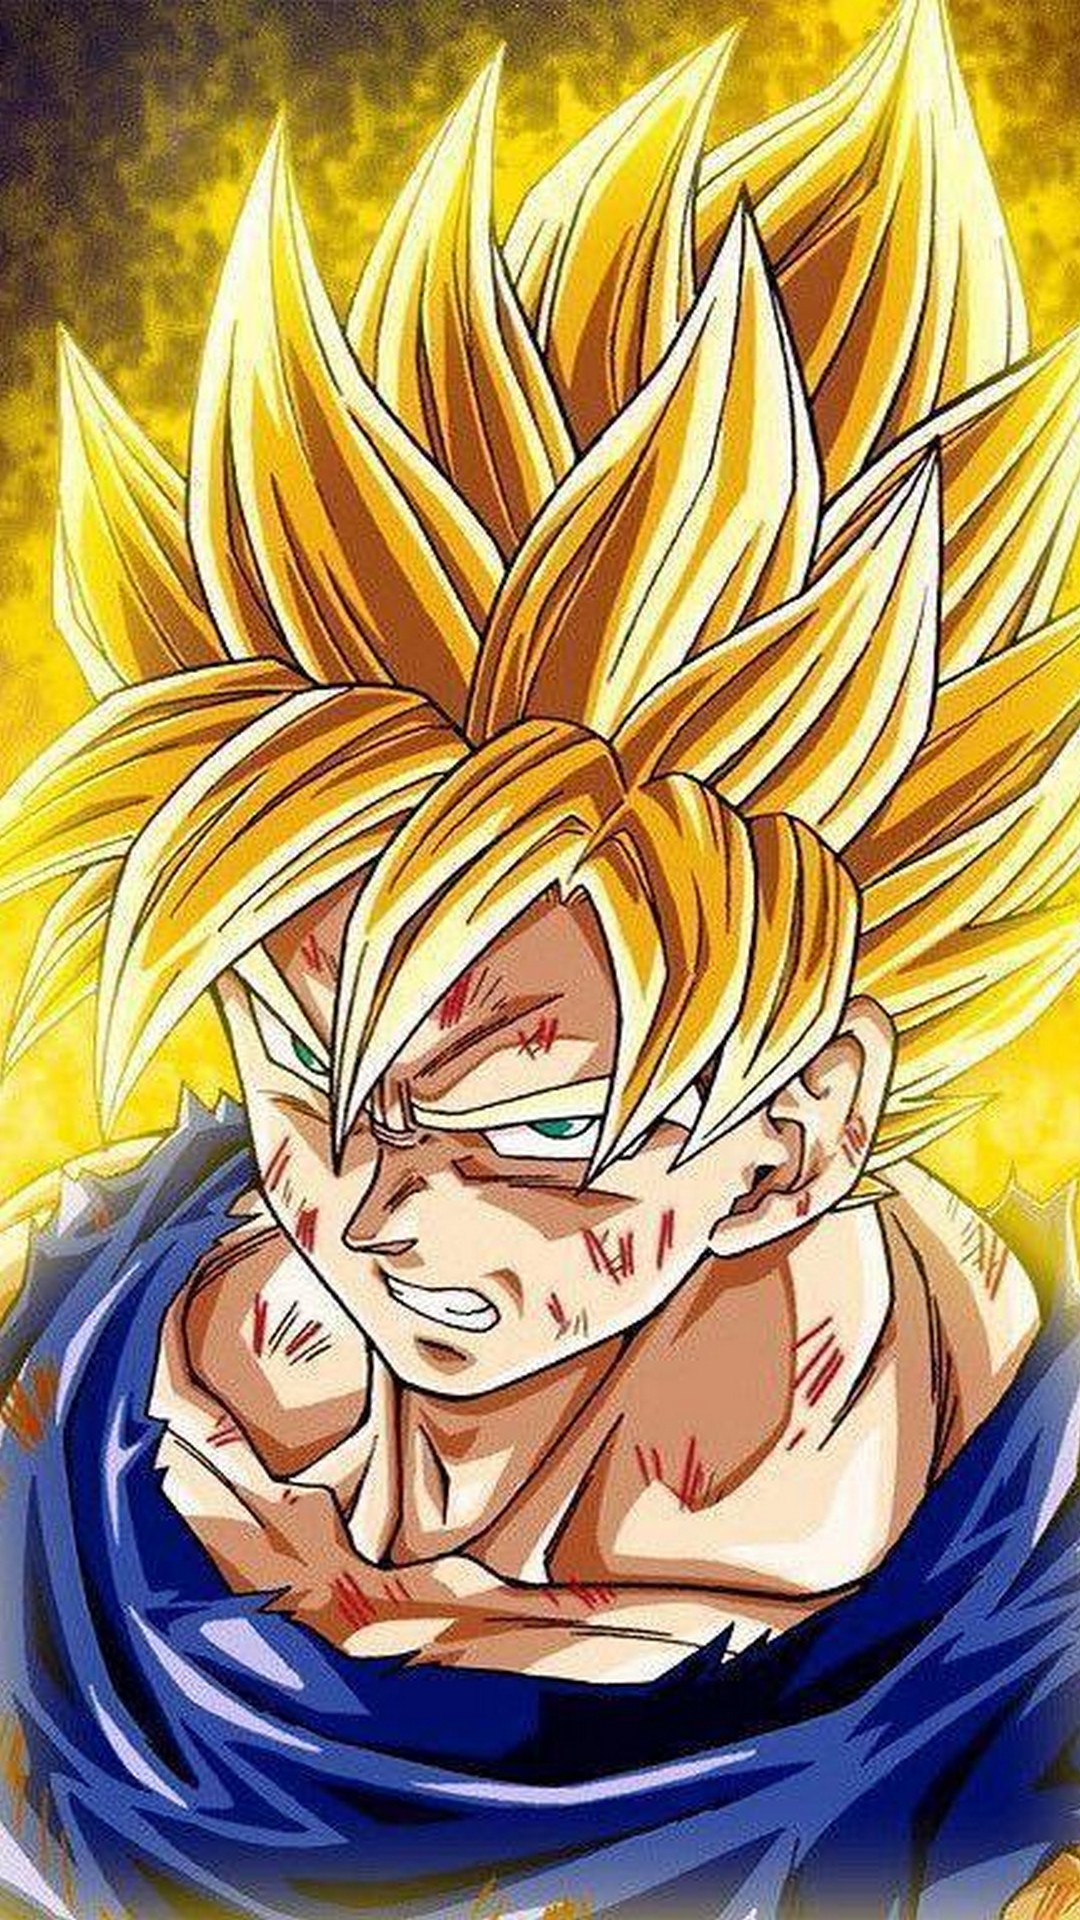 Wallpapers Goku with image resolution 1080x1920 pixel. You can make this wallpaper for your iPhone 5, 6, 7, 8, X backgrounds, Mobile Screensaver, or iPad Lock Screen